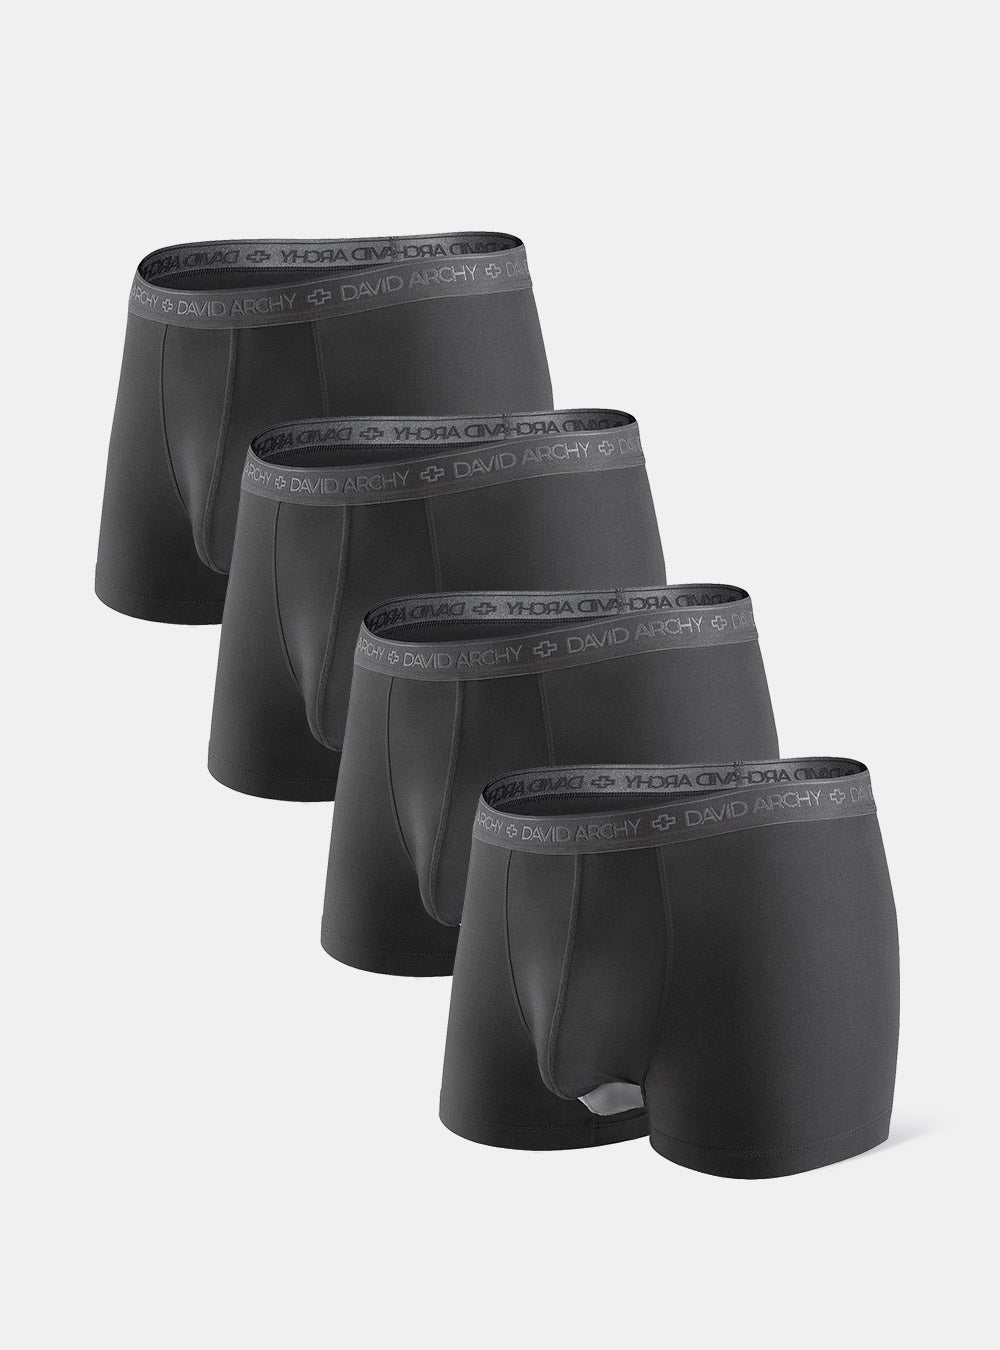 4 Packs Separate Modal Dual Pouch Trunks